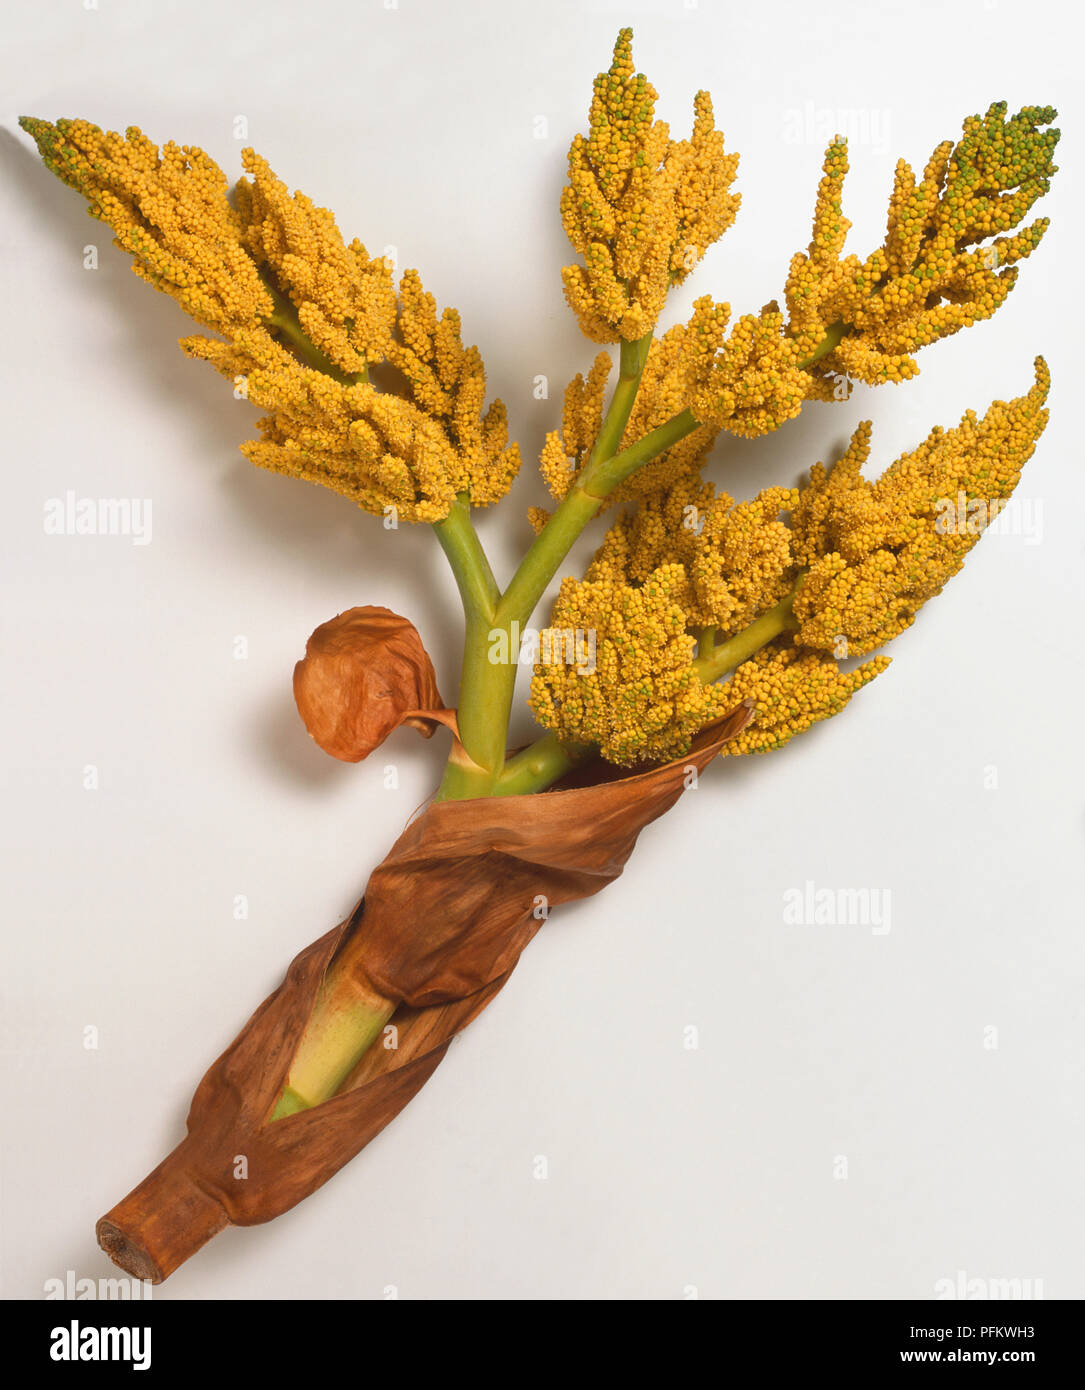 Palmae, Trachycarpus, fortunei, Chusan Palm, stalk covered with brown remnants of old leaves, and stout flower stalks with very small yellow flowers in drooping panicles. Stock Photo